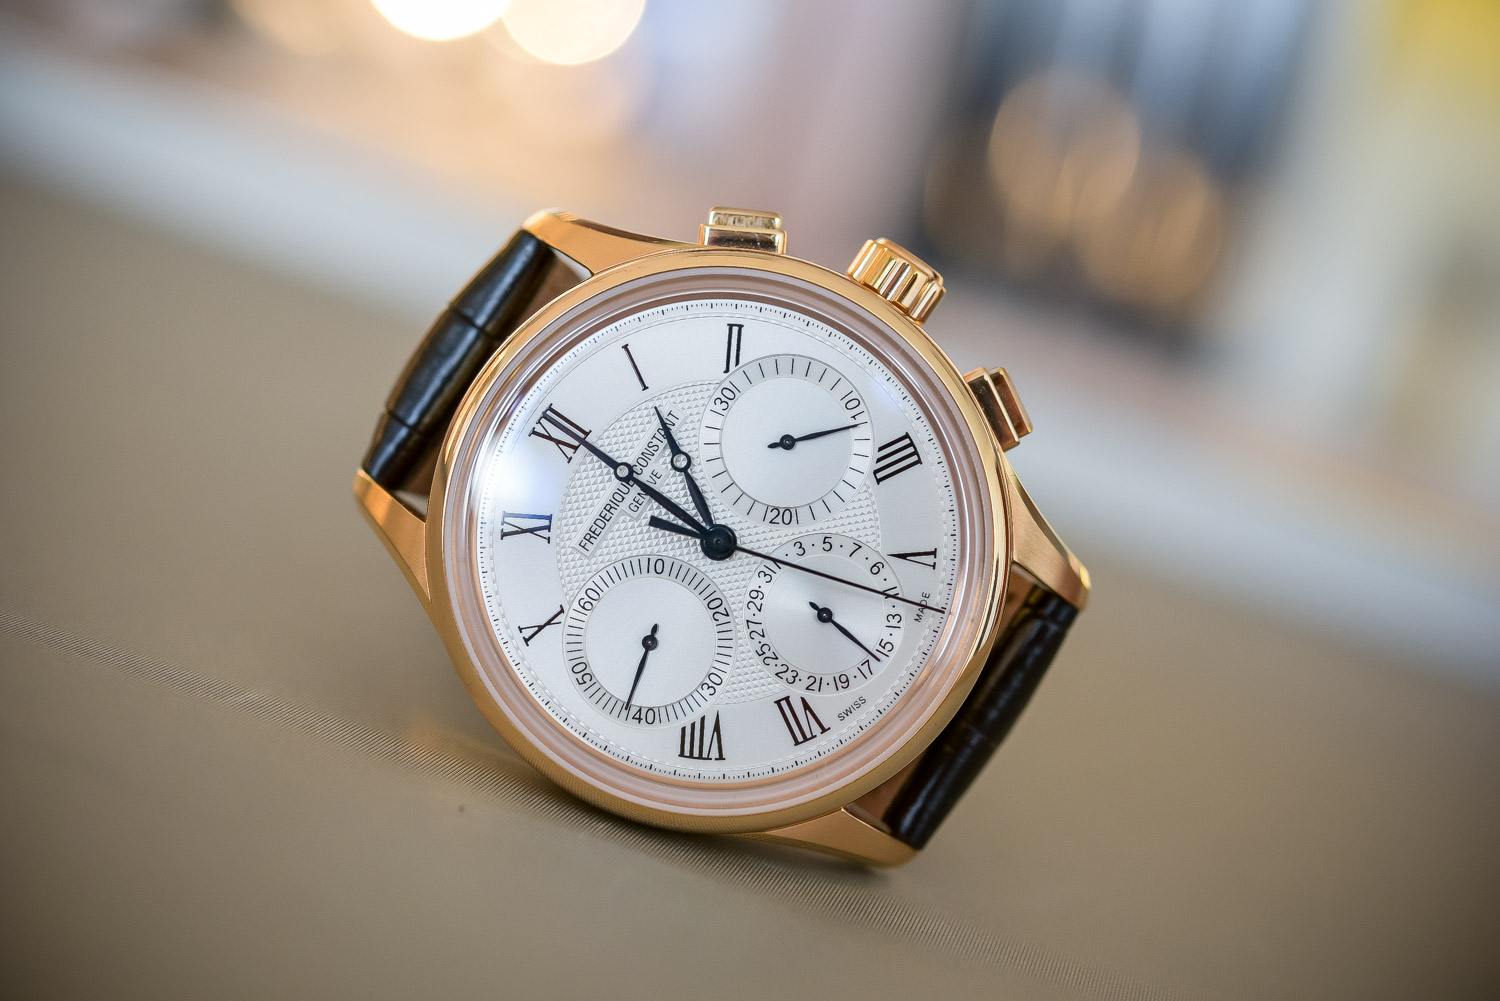 Frederique Constant Flyback Chronograph Manufacture - Baselworld 2017